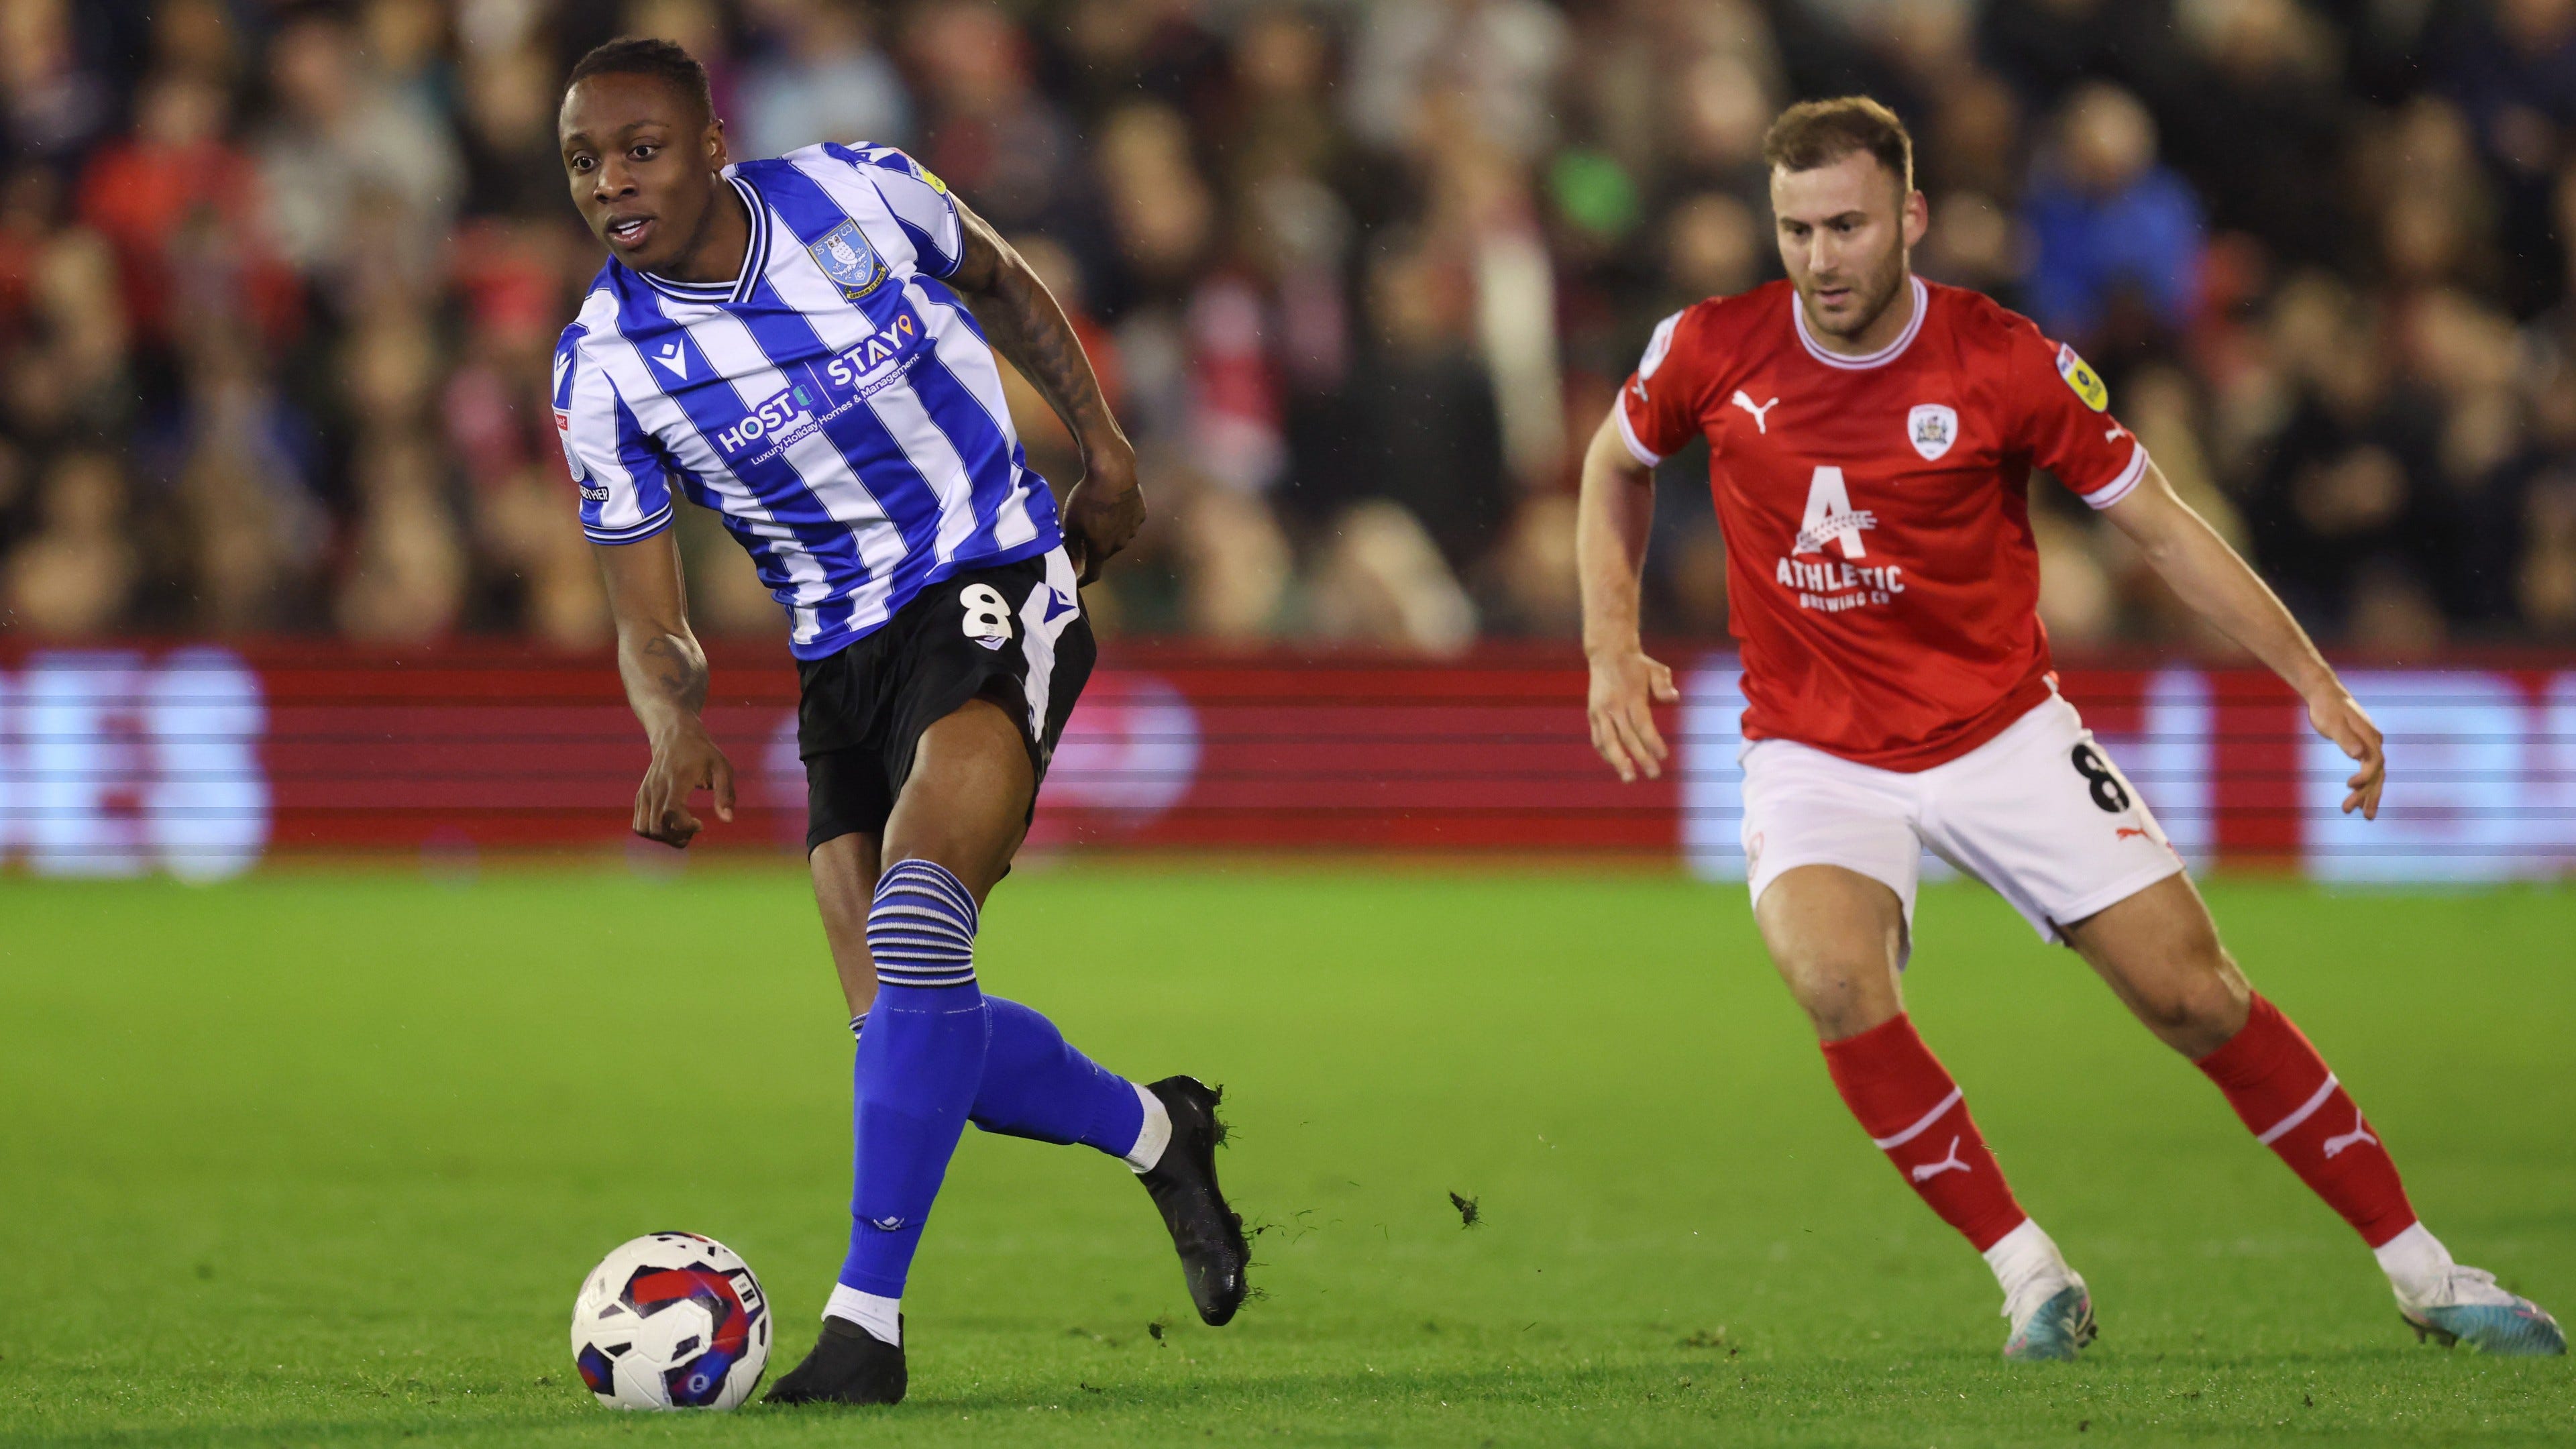 Barnsley vs Sheffield Wednesday: Live stream, TV channel, kick-off time & where to watch League One play-off final